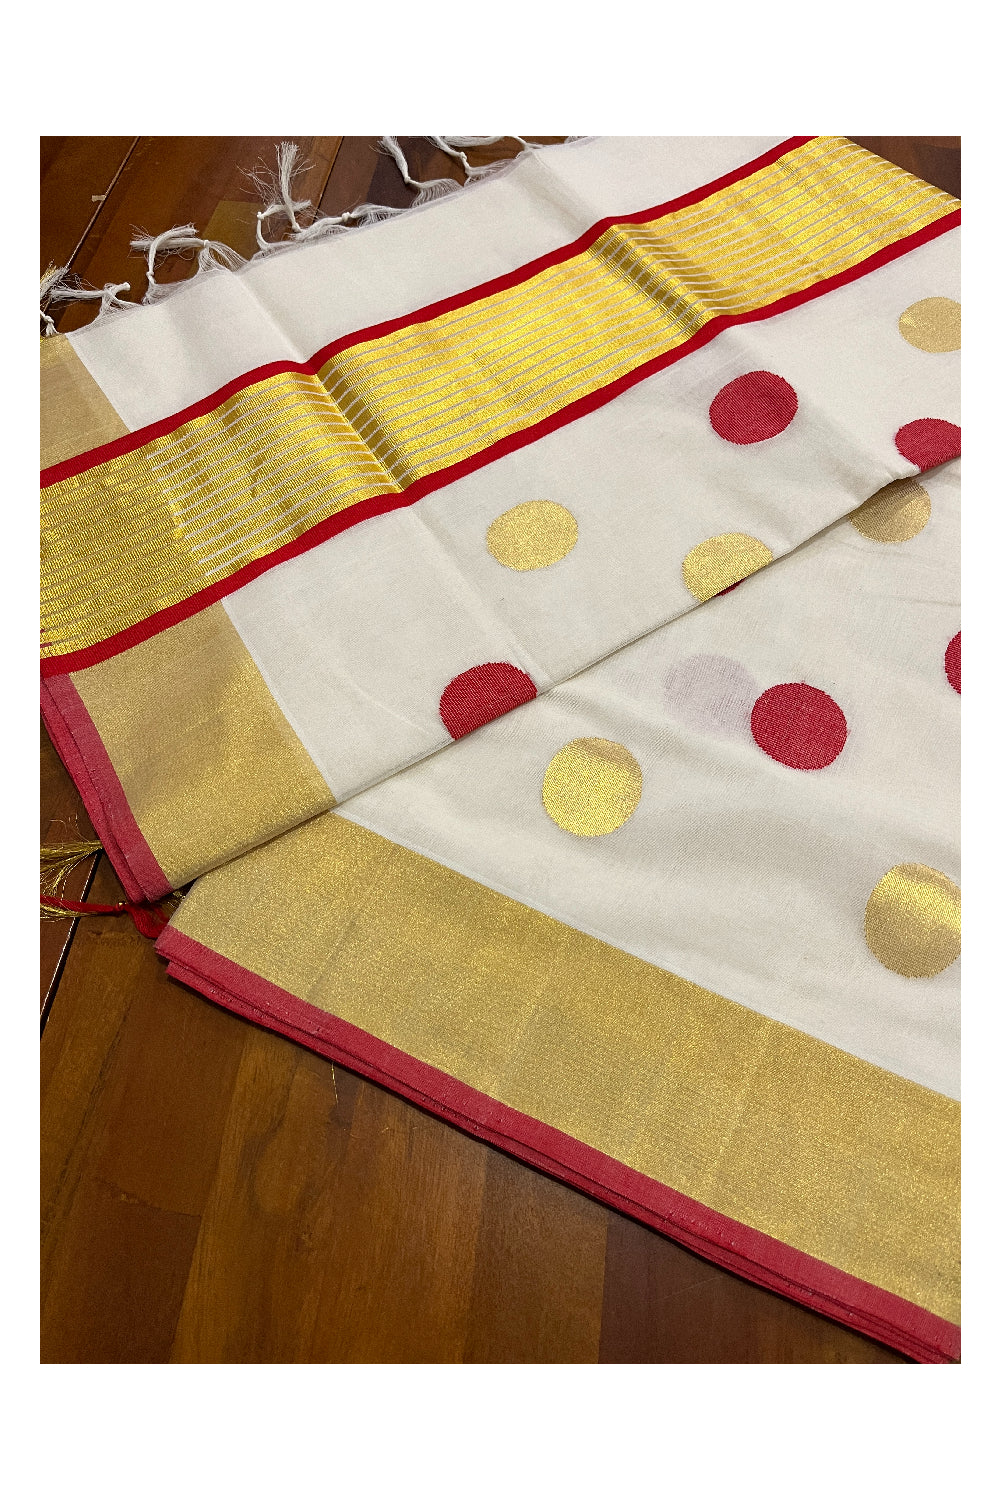 Southloom™ Premium Handloom Cotton Kerala Saree with Golden and Red Polka works on Body